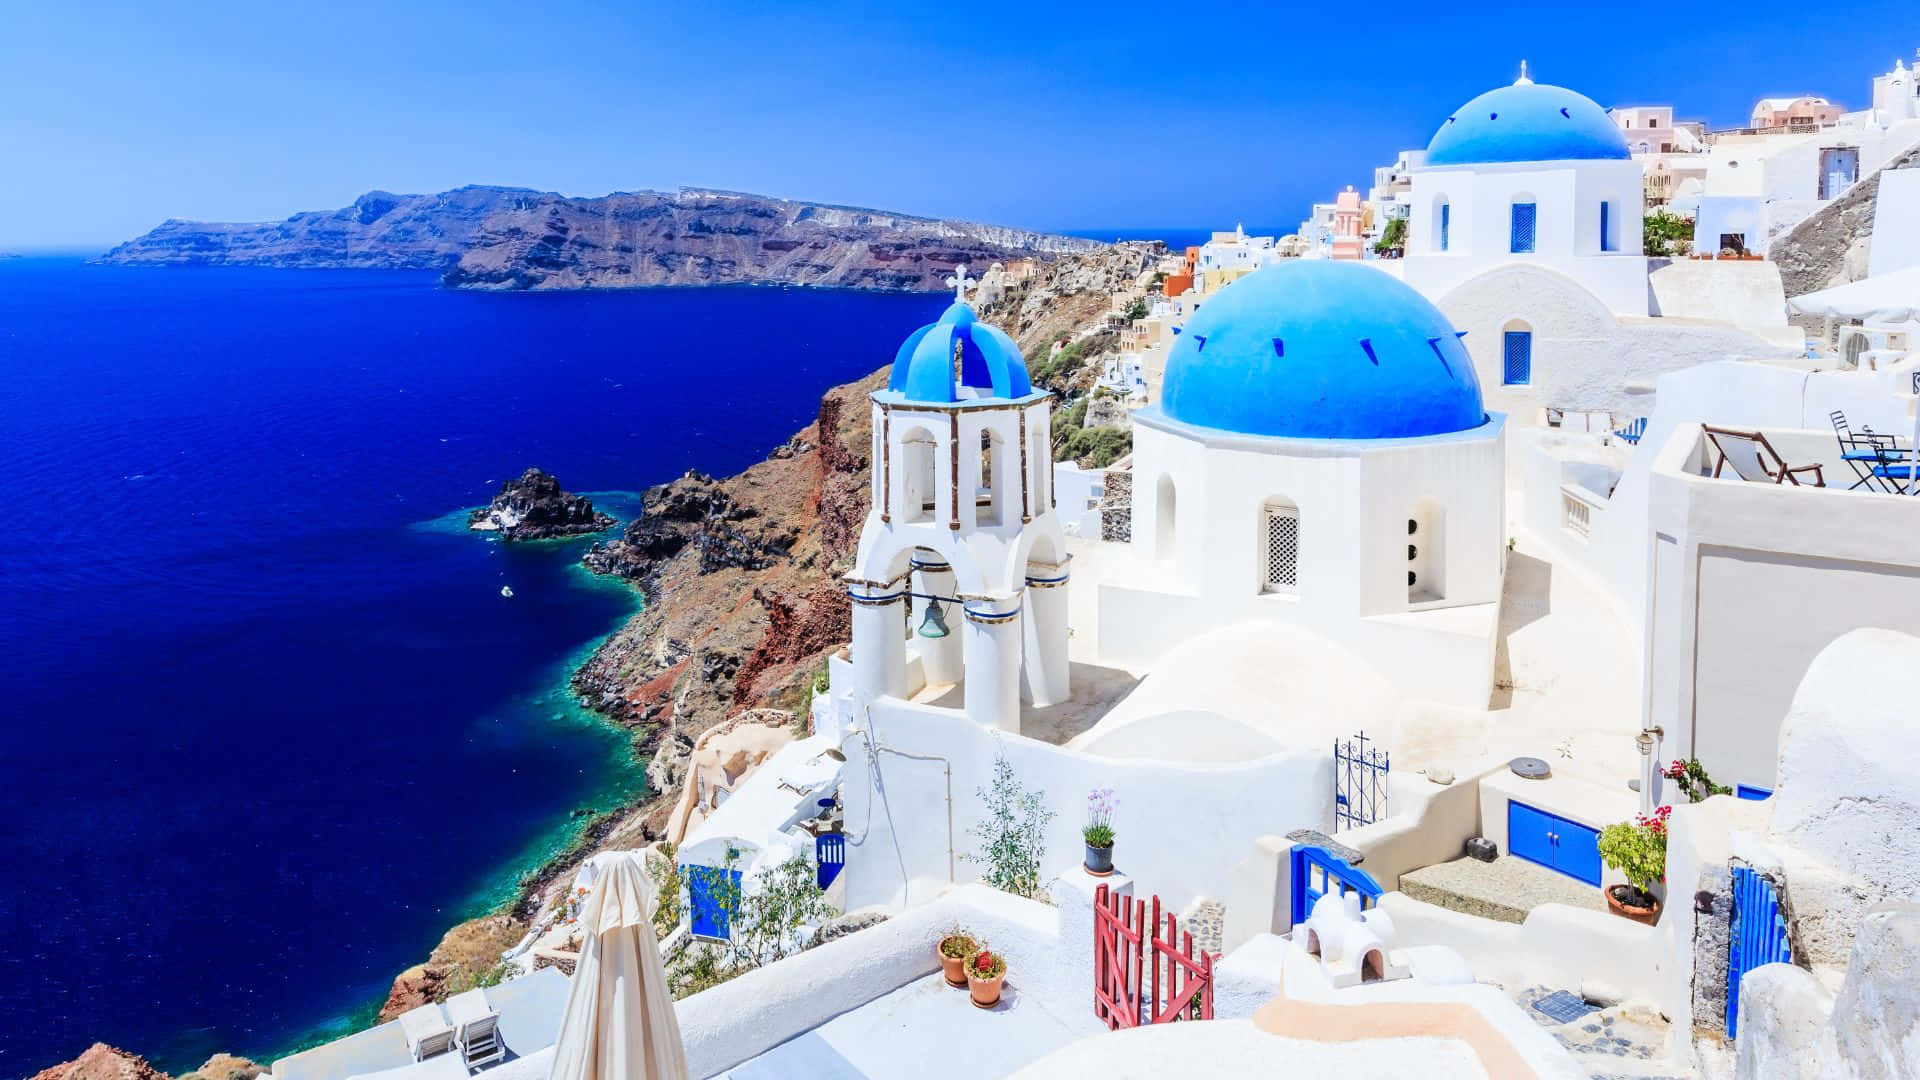 Take in the beauty of the Mediterranean coast of Greece